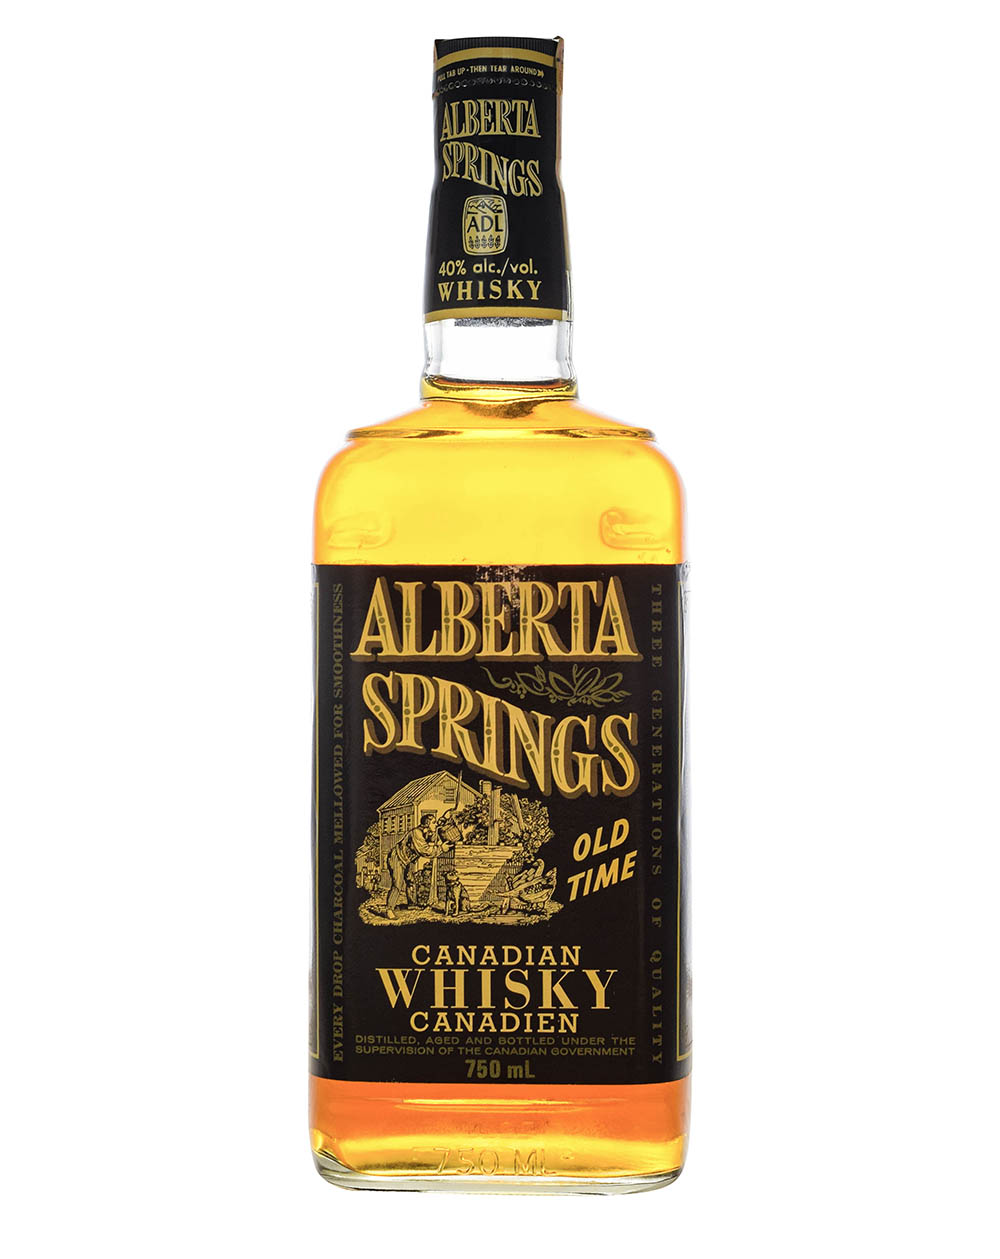 Alberta Springs Old Time Canadian Whisky